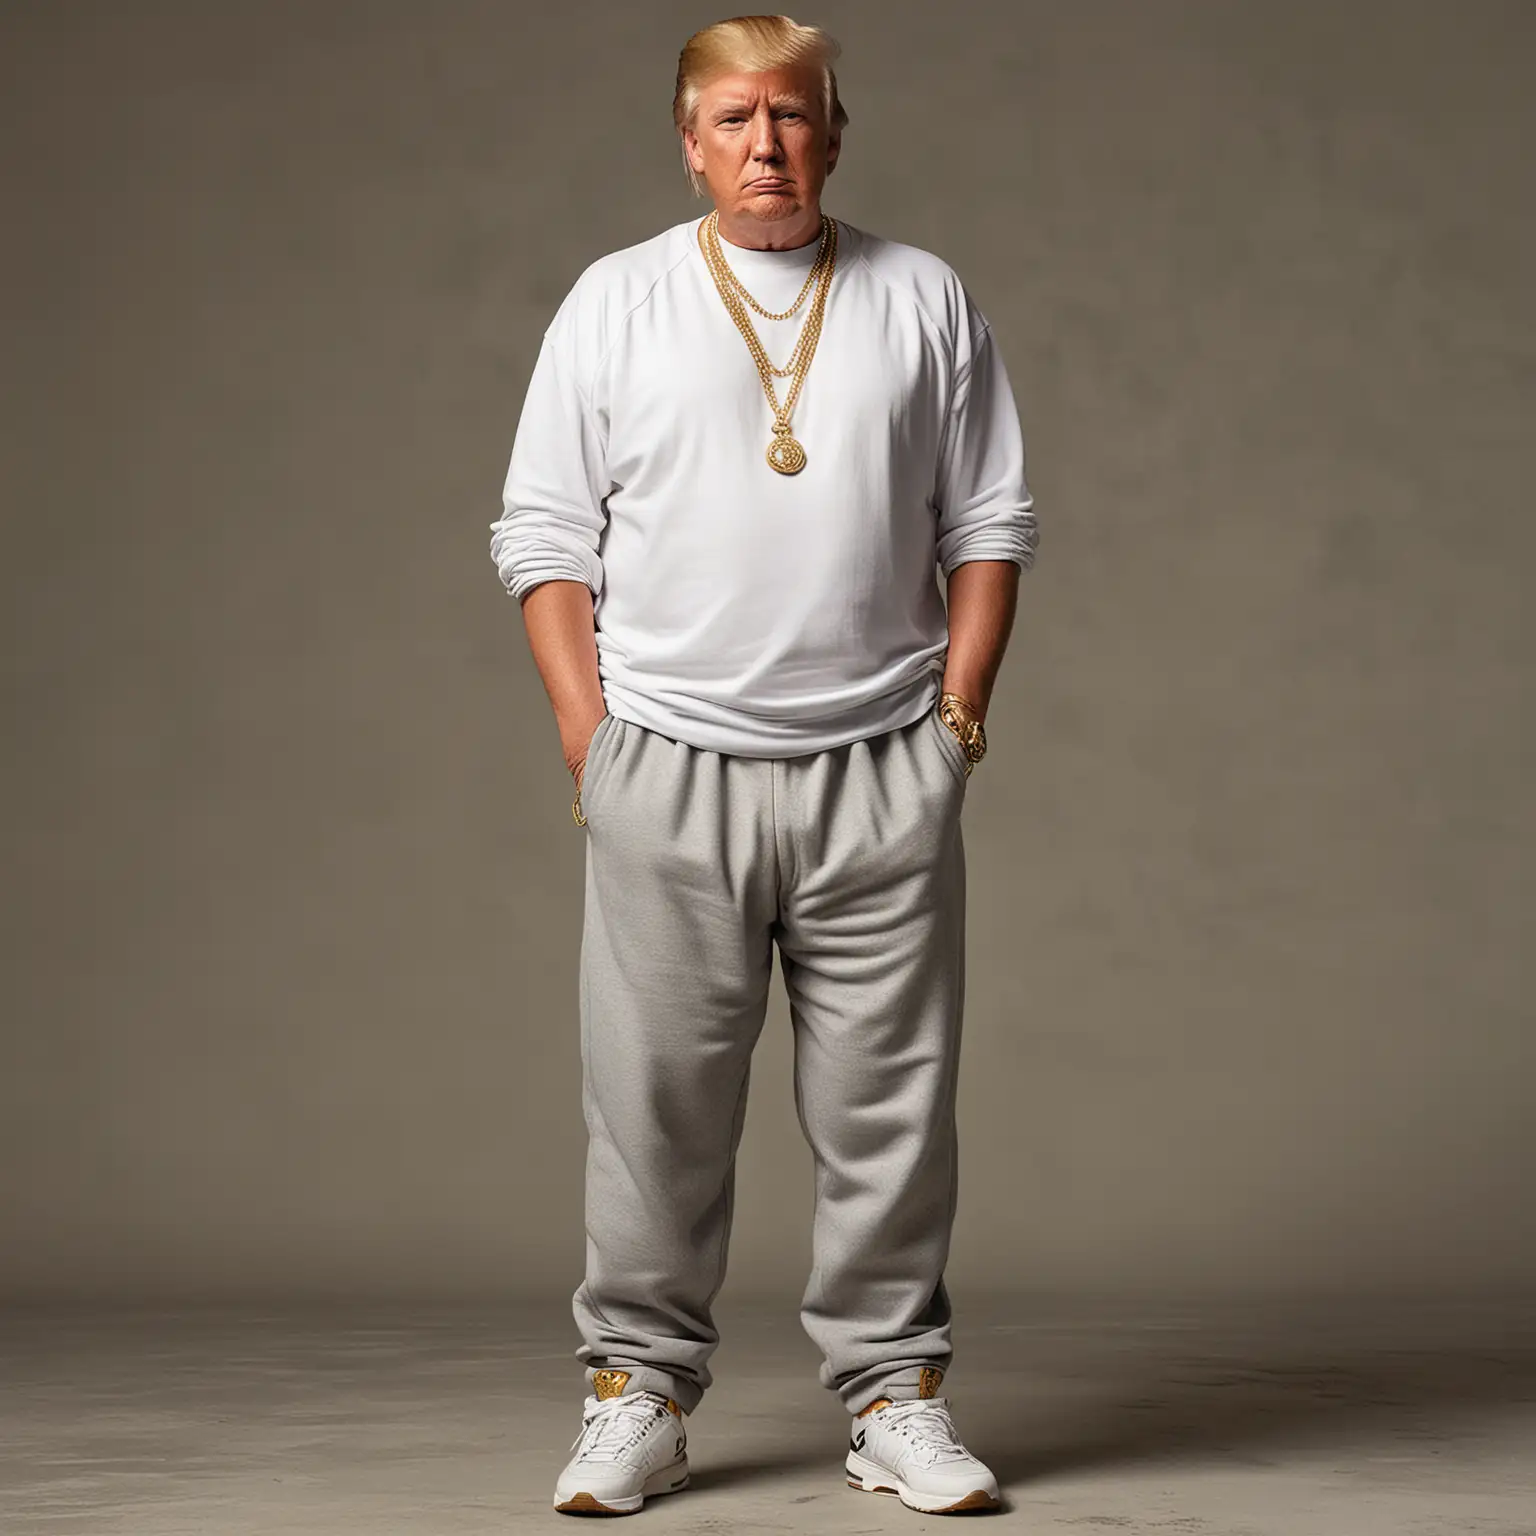 Donald trump in baggy sweatpants and wearing a gold chain